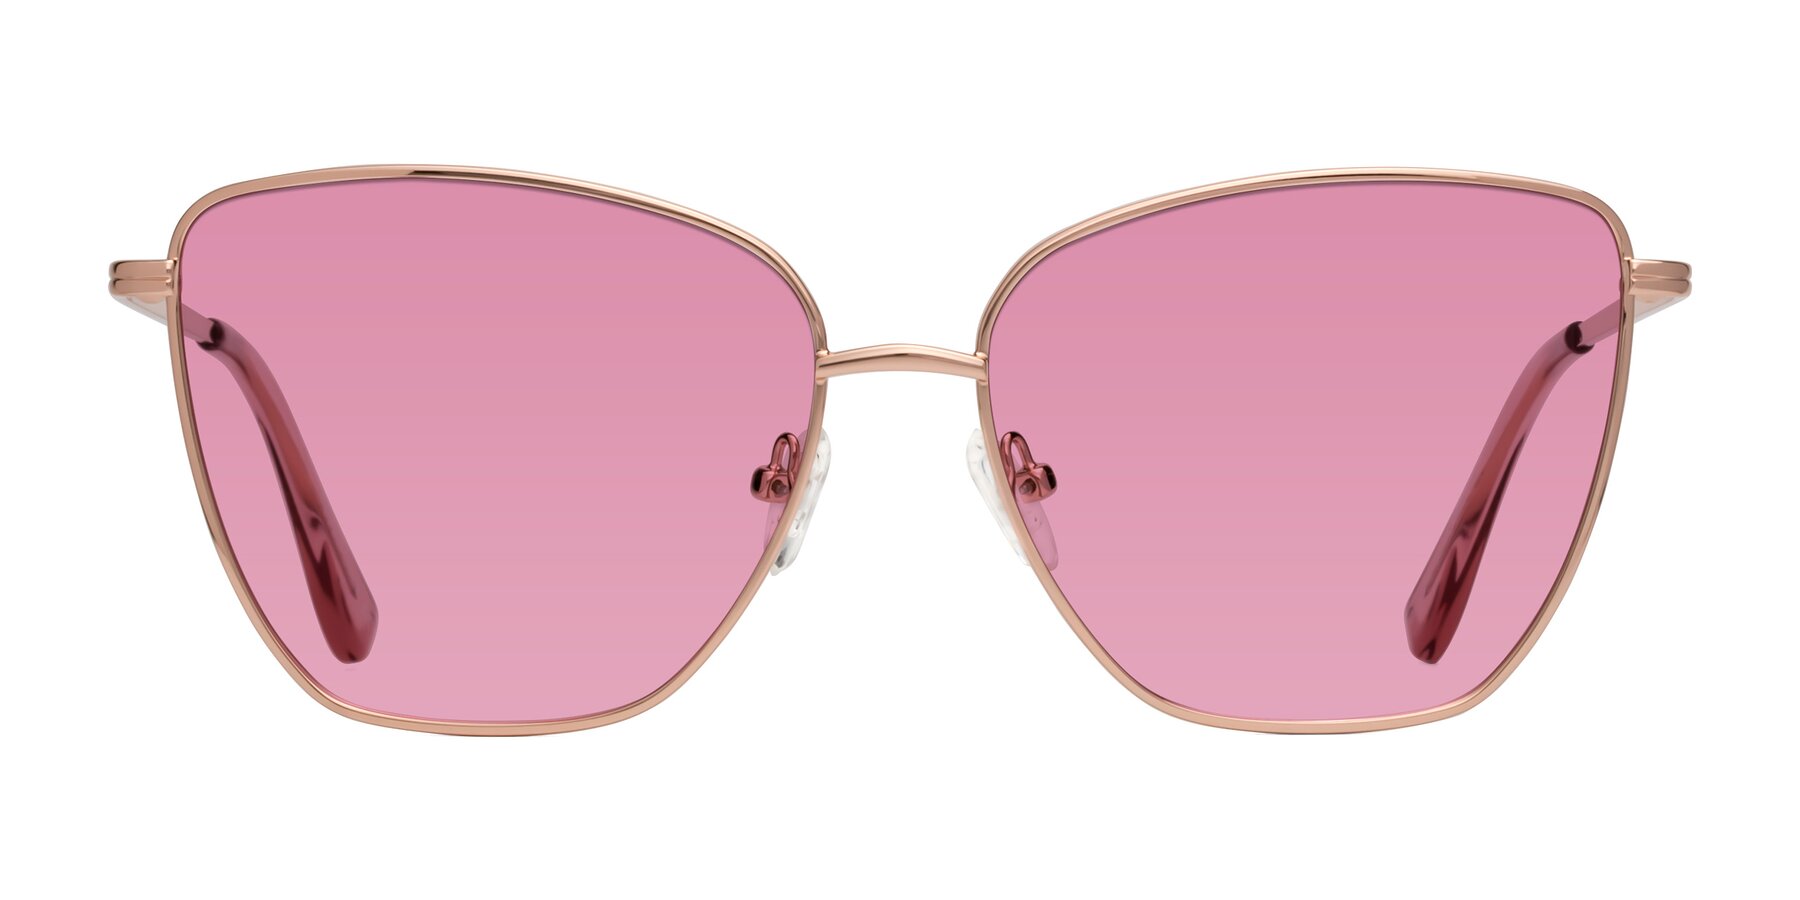 Oysters - Rose Gold Sunglasses